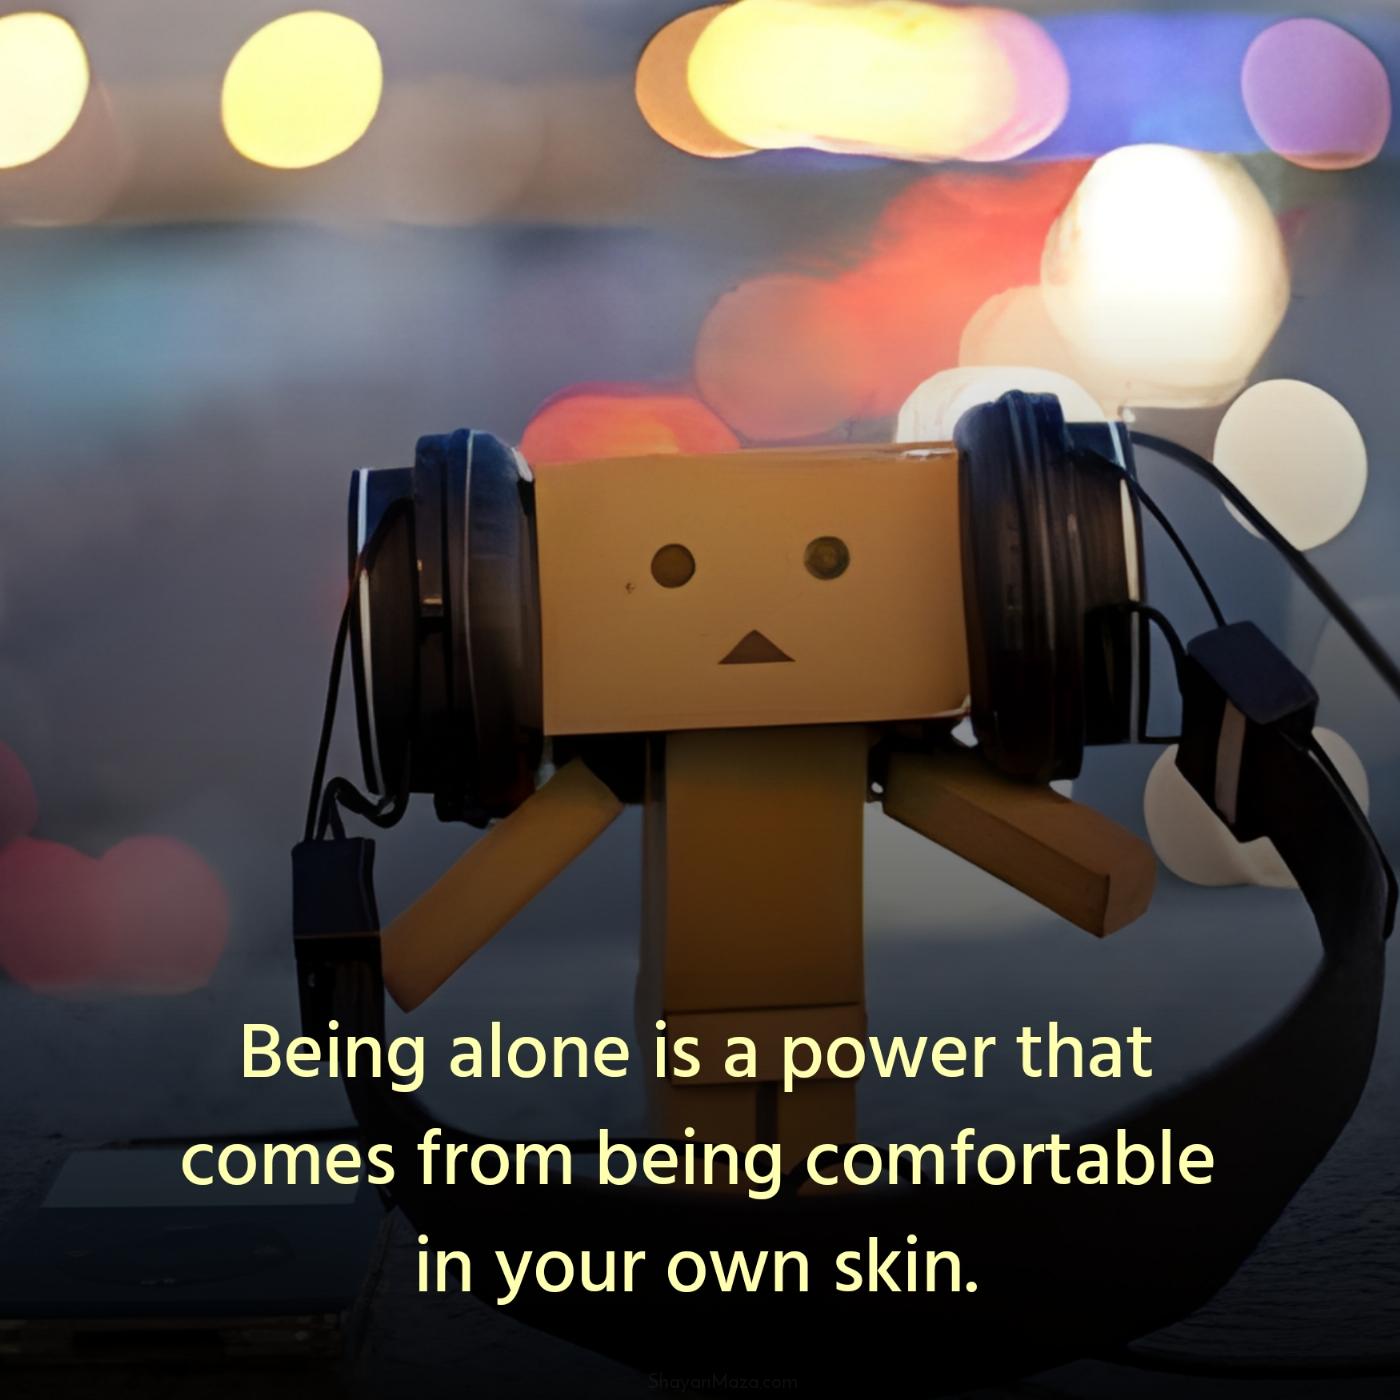 Being alone is a power that comes from being comfortable